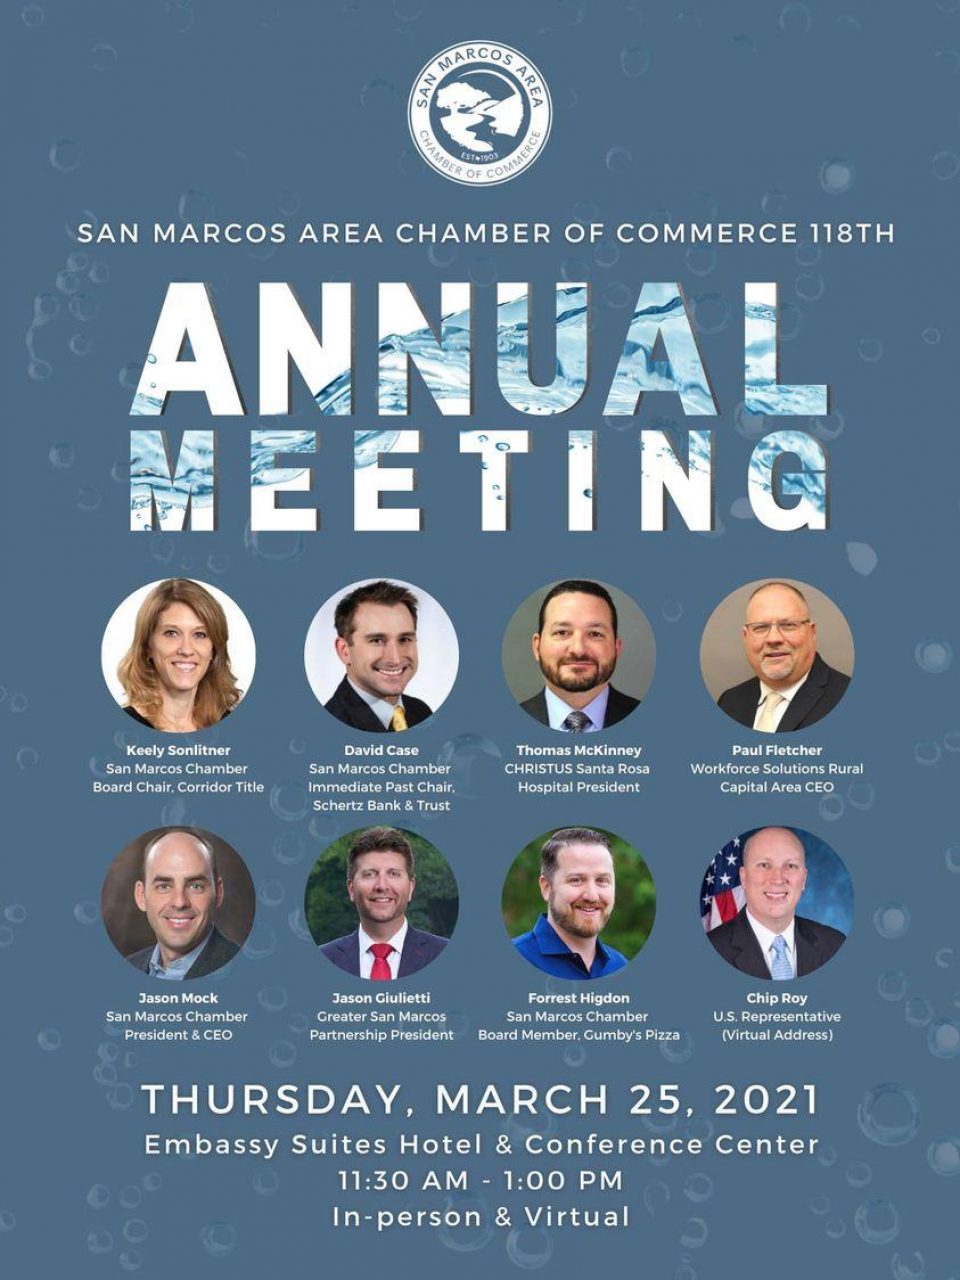 WSRCA to Take Part in San Marcos Area Chamber's Annual Meeting on March 25